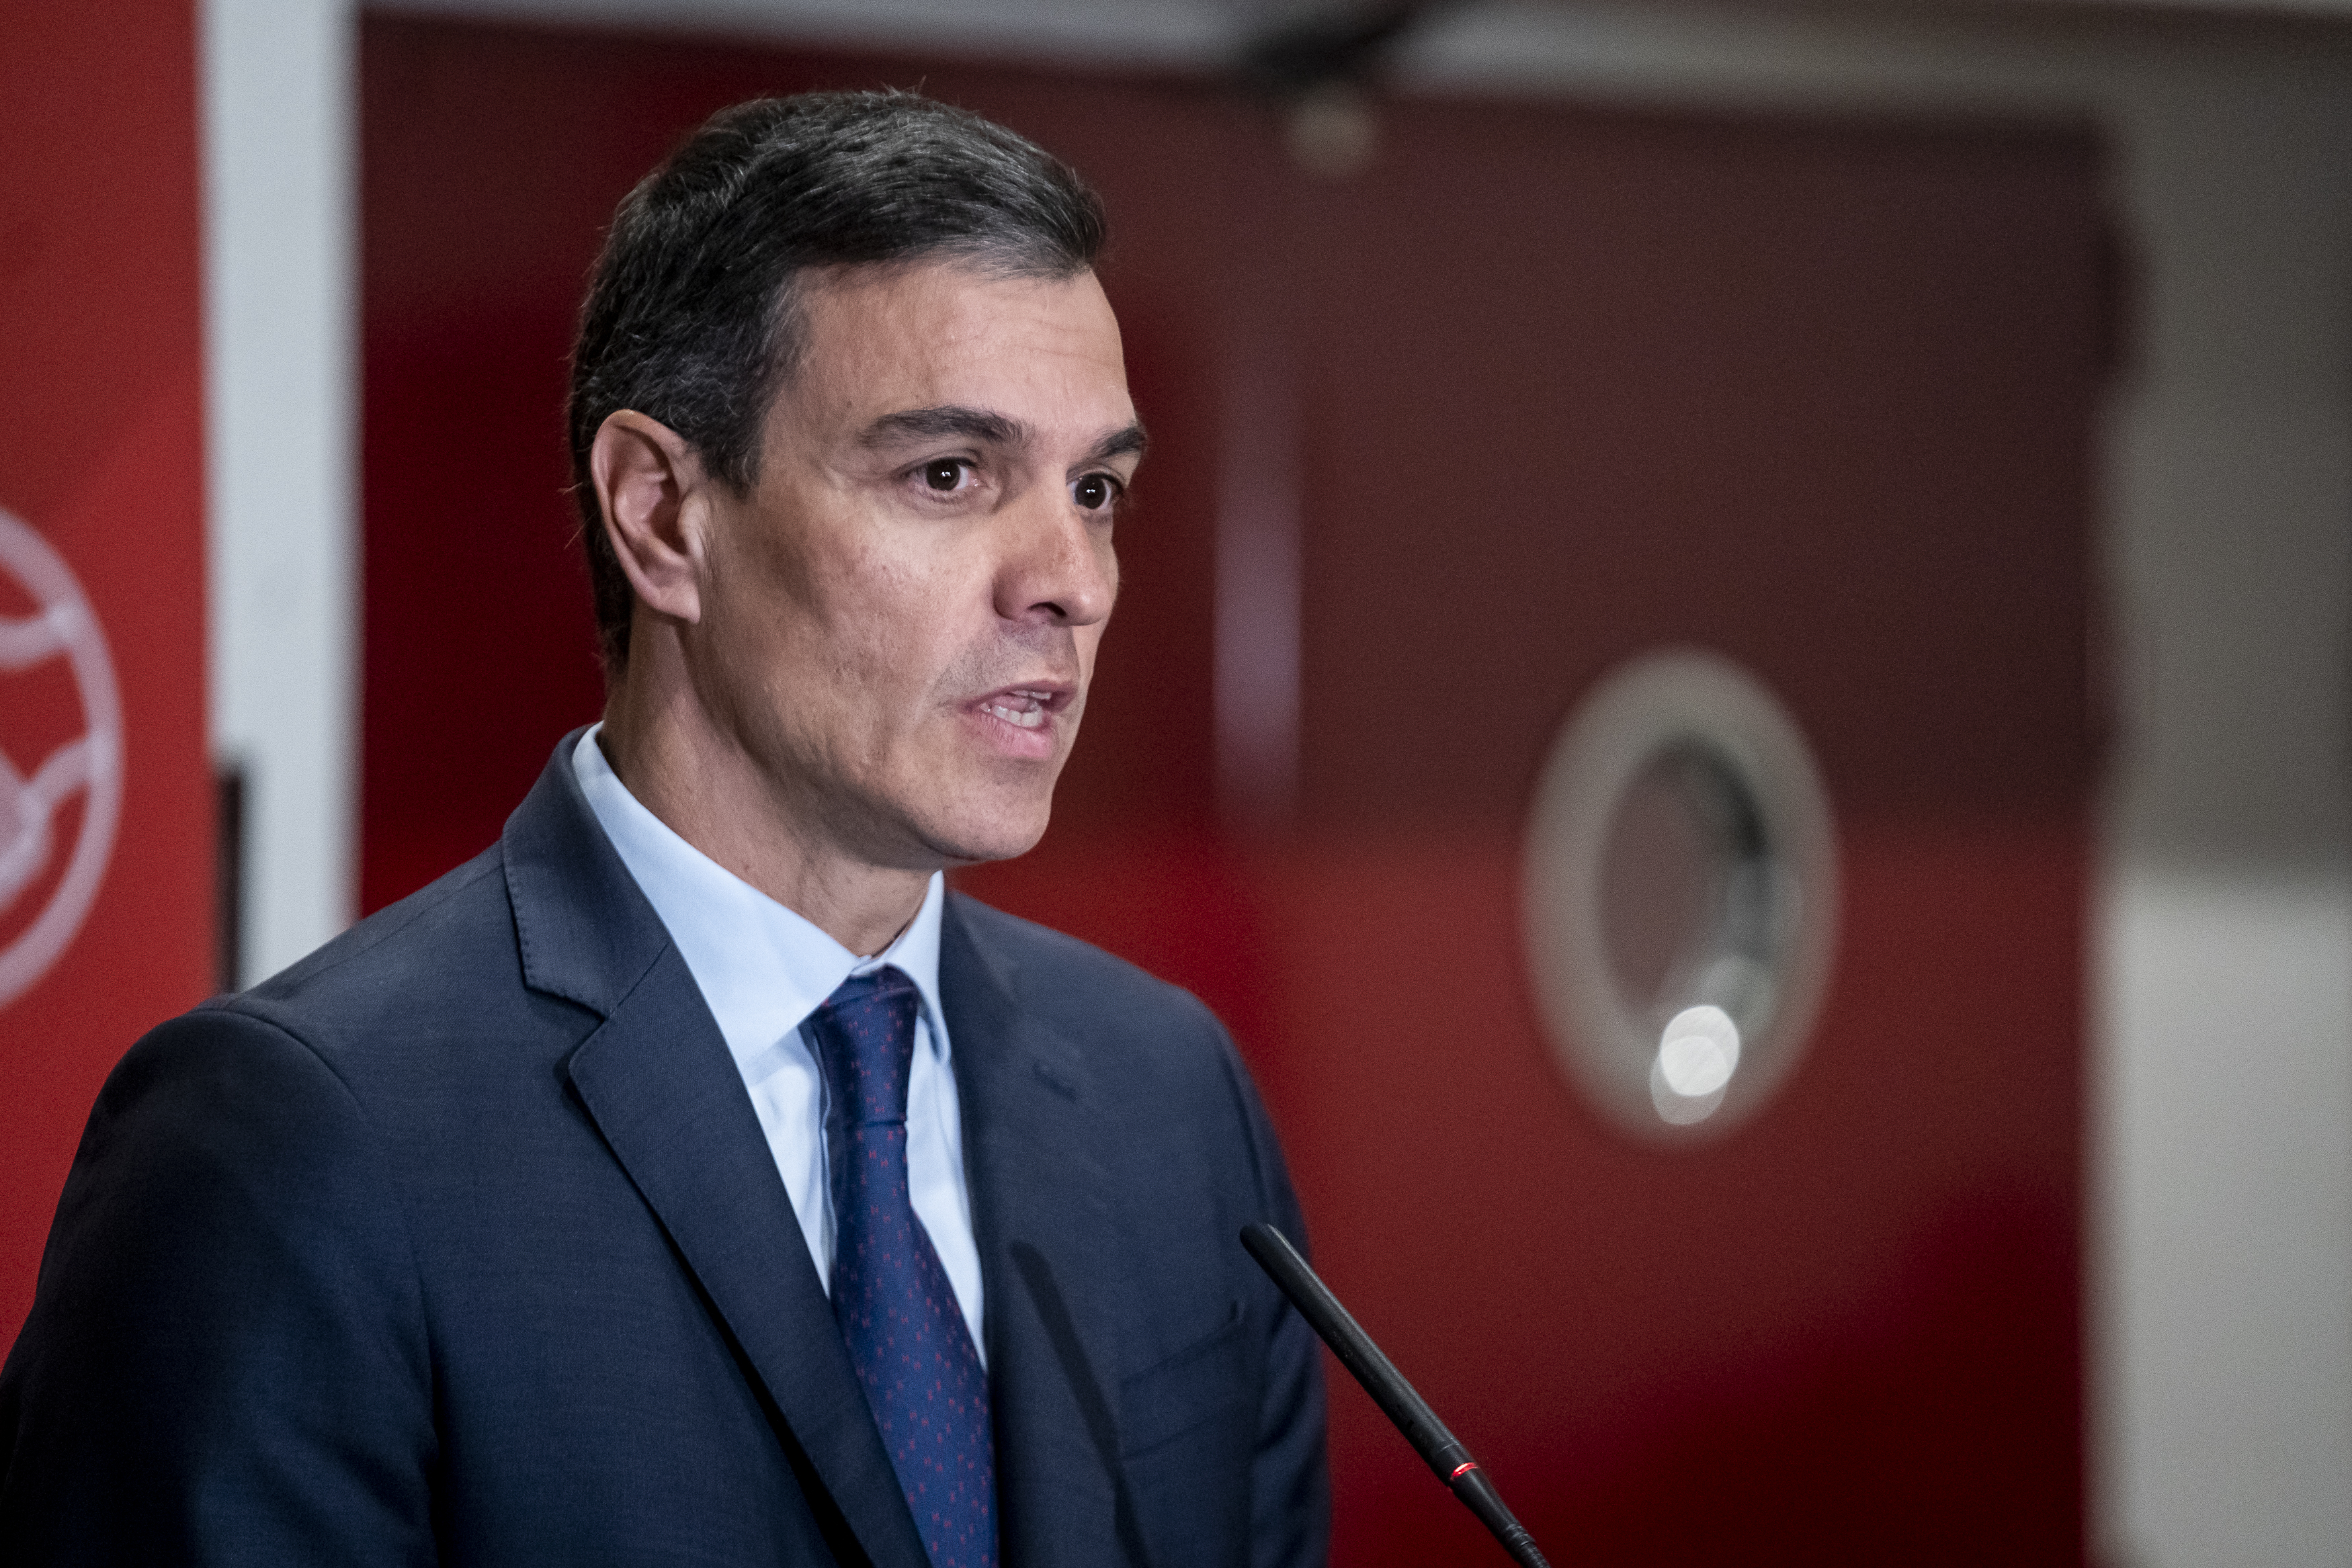 Spanish Prime Minister Pedro Sánchez at the union's headquarters in Madrid, Spain on Wednesday.